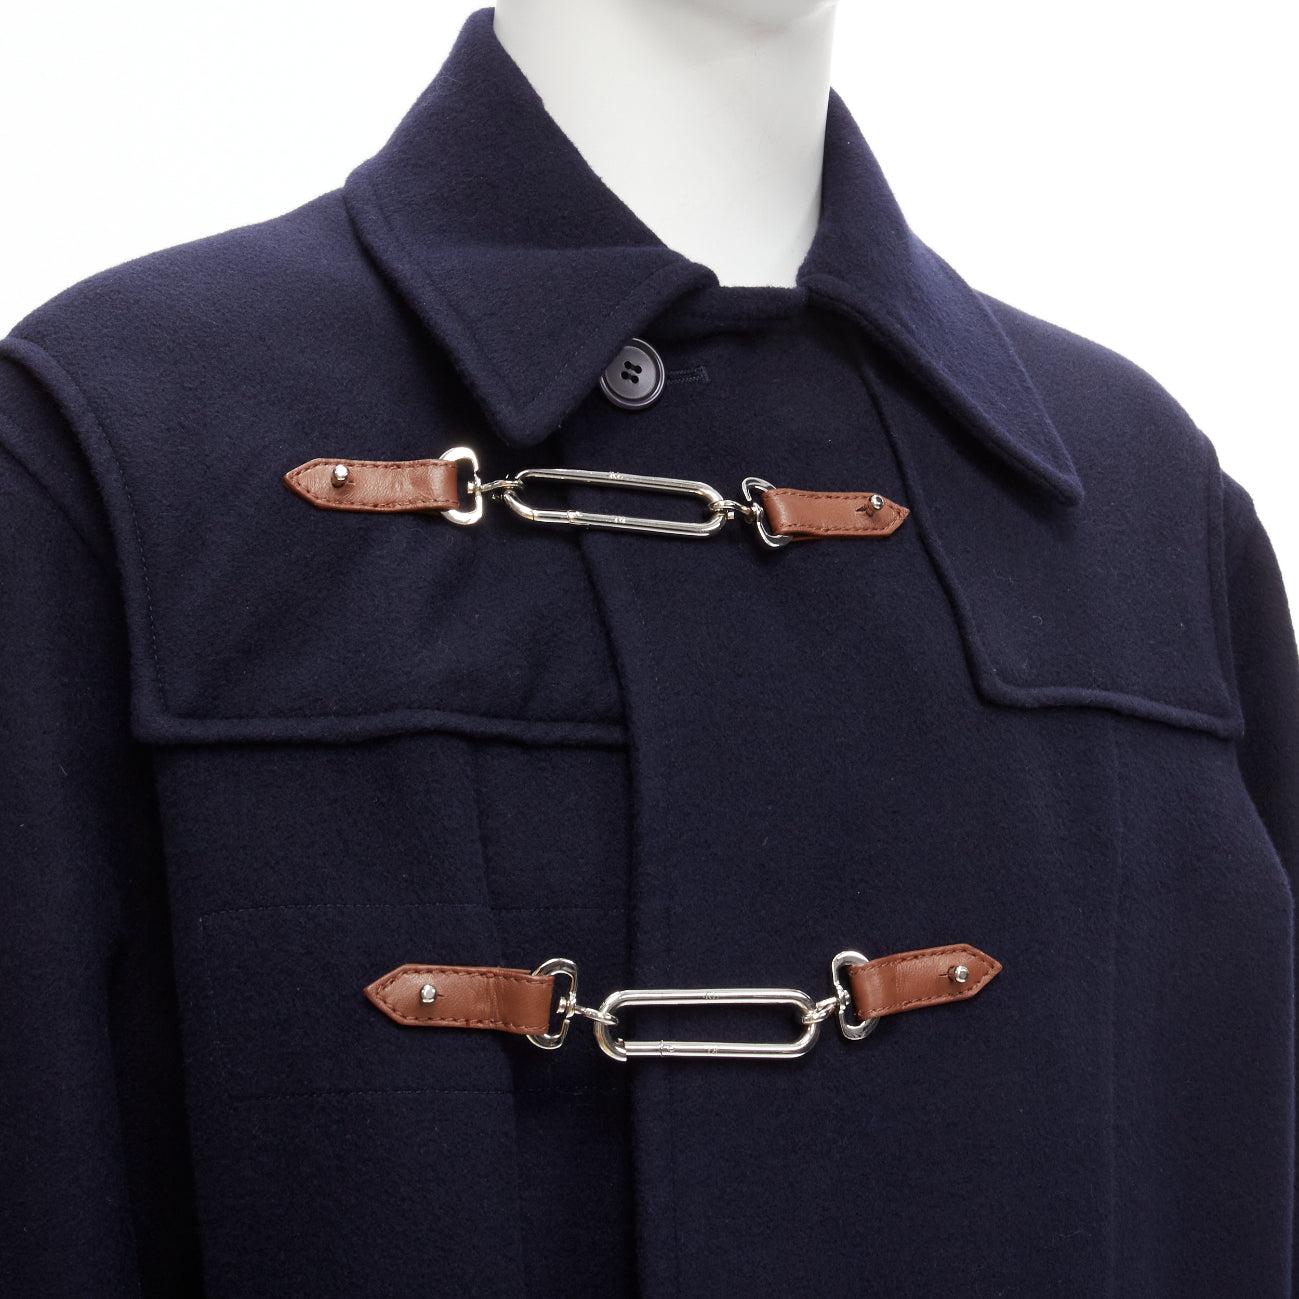 RALPH LAUREN Purple Label Fintona 100% wool navy brown silver toggle buckle coat Size 6 M
Reference: JSLE/A00020
Brand: Ralph Lauren
Model: Fintona
Collection: Purple Label
Material: Wool
Color: Navy, Brown
Pattern: Solid
Closure: Button
Lining: